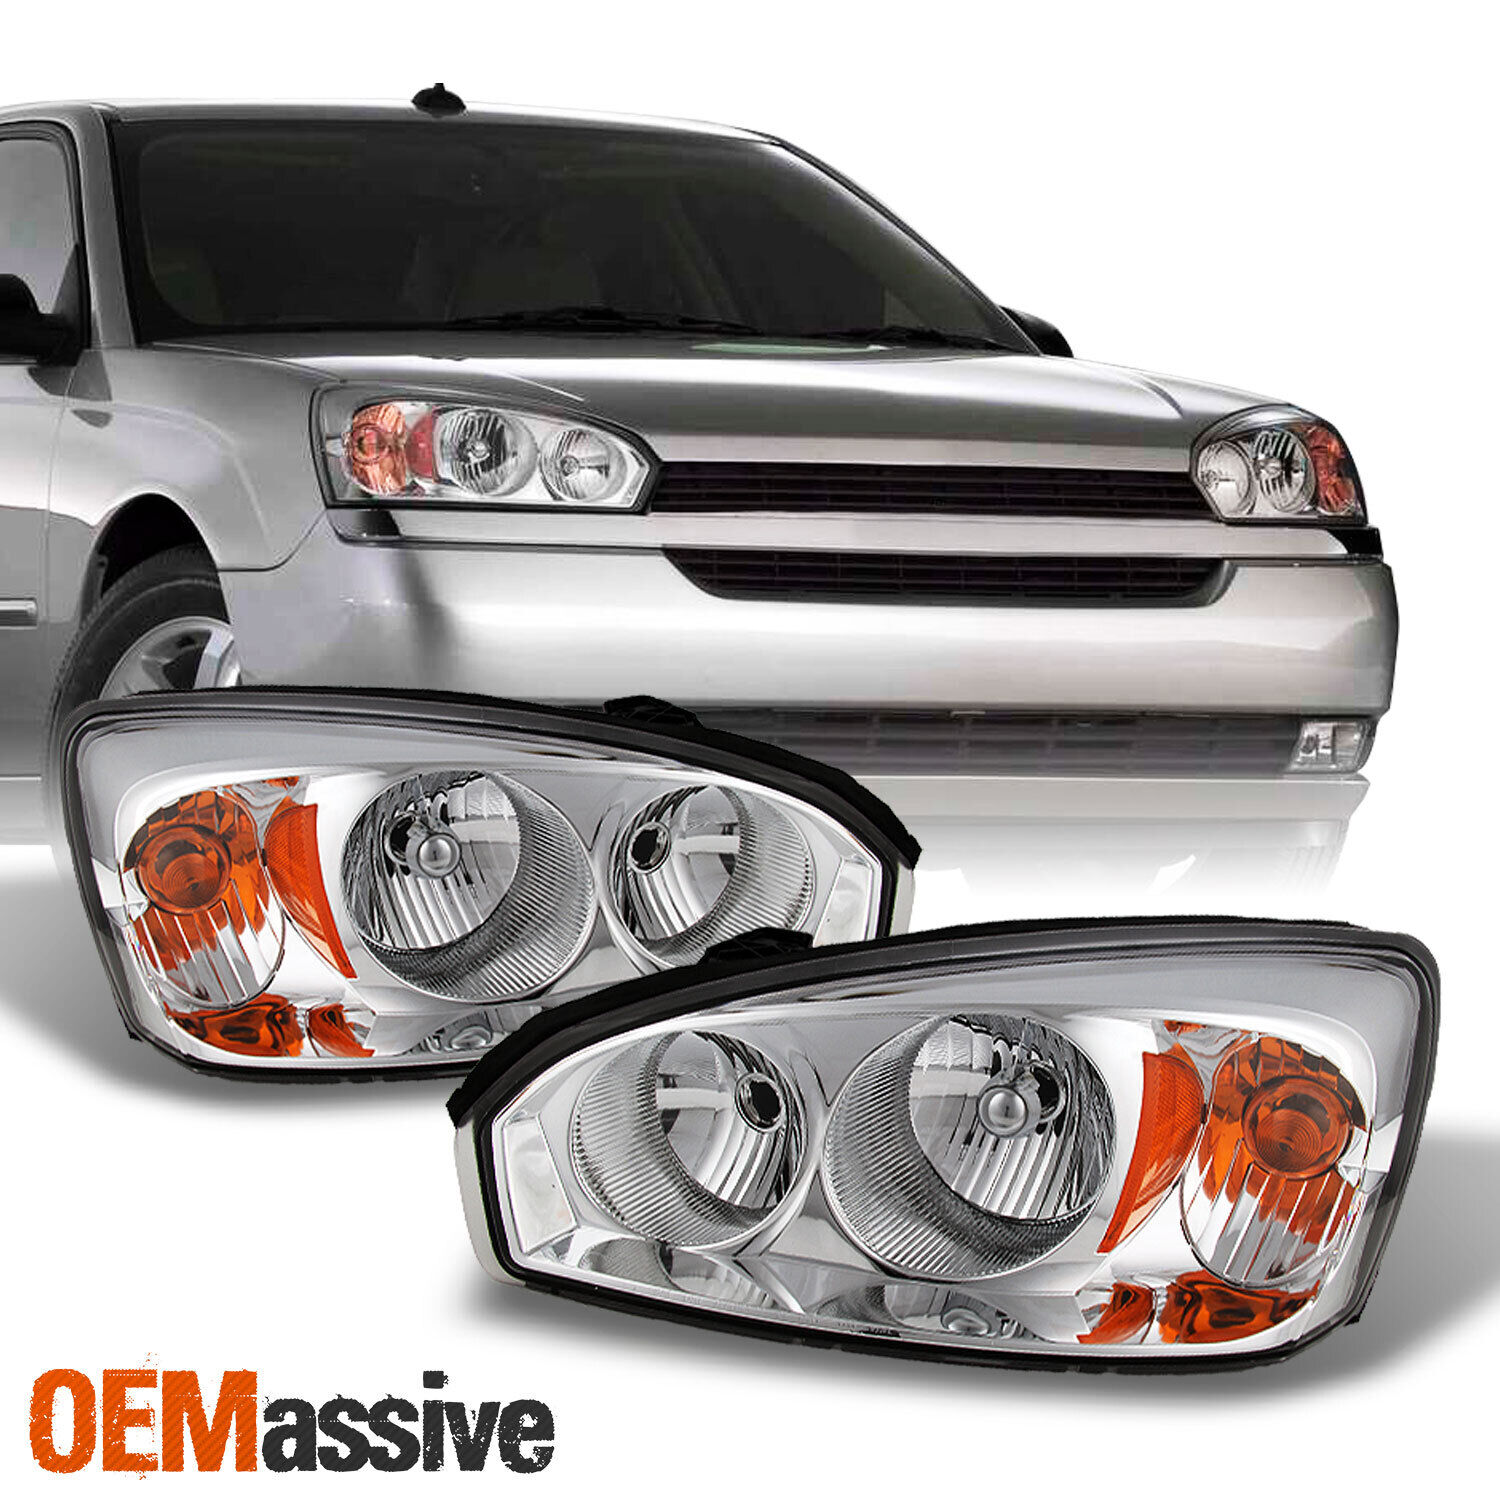 Fits 04-08 Chevy Malibu Headlights Lights Lamps Replacement Pair Set 2004-2008